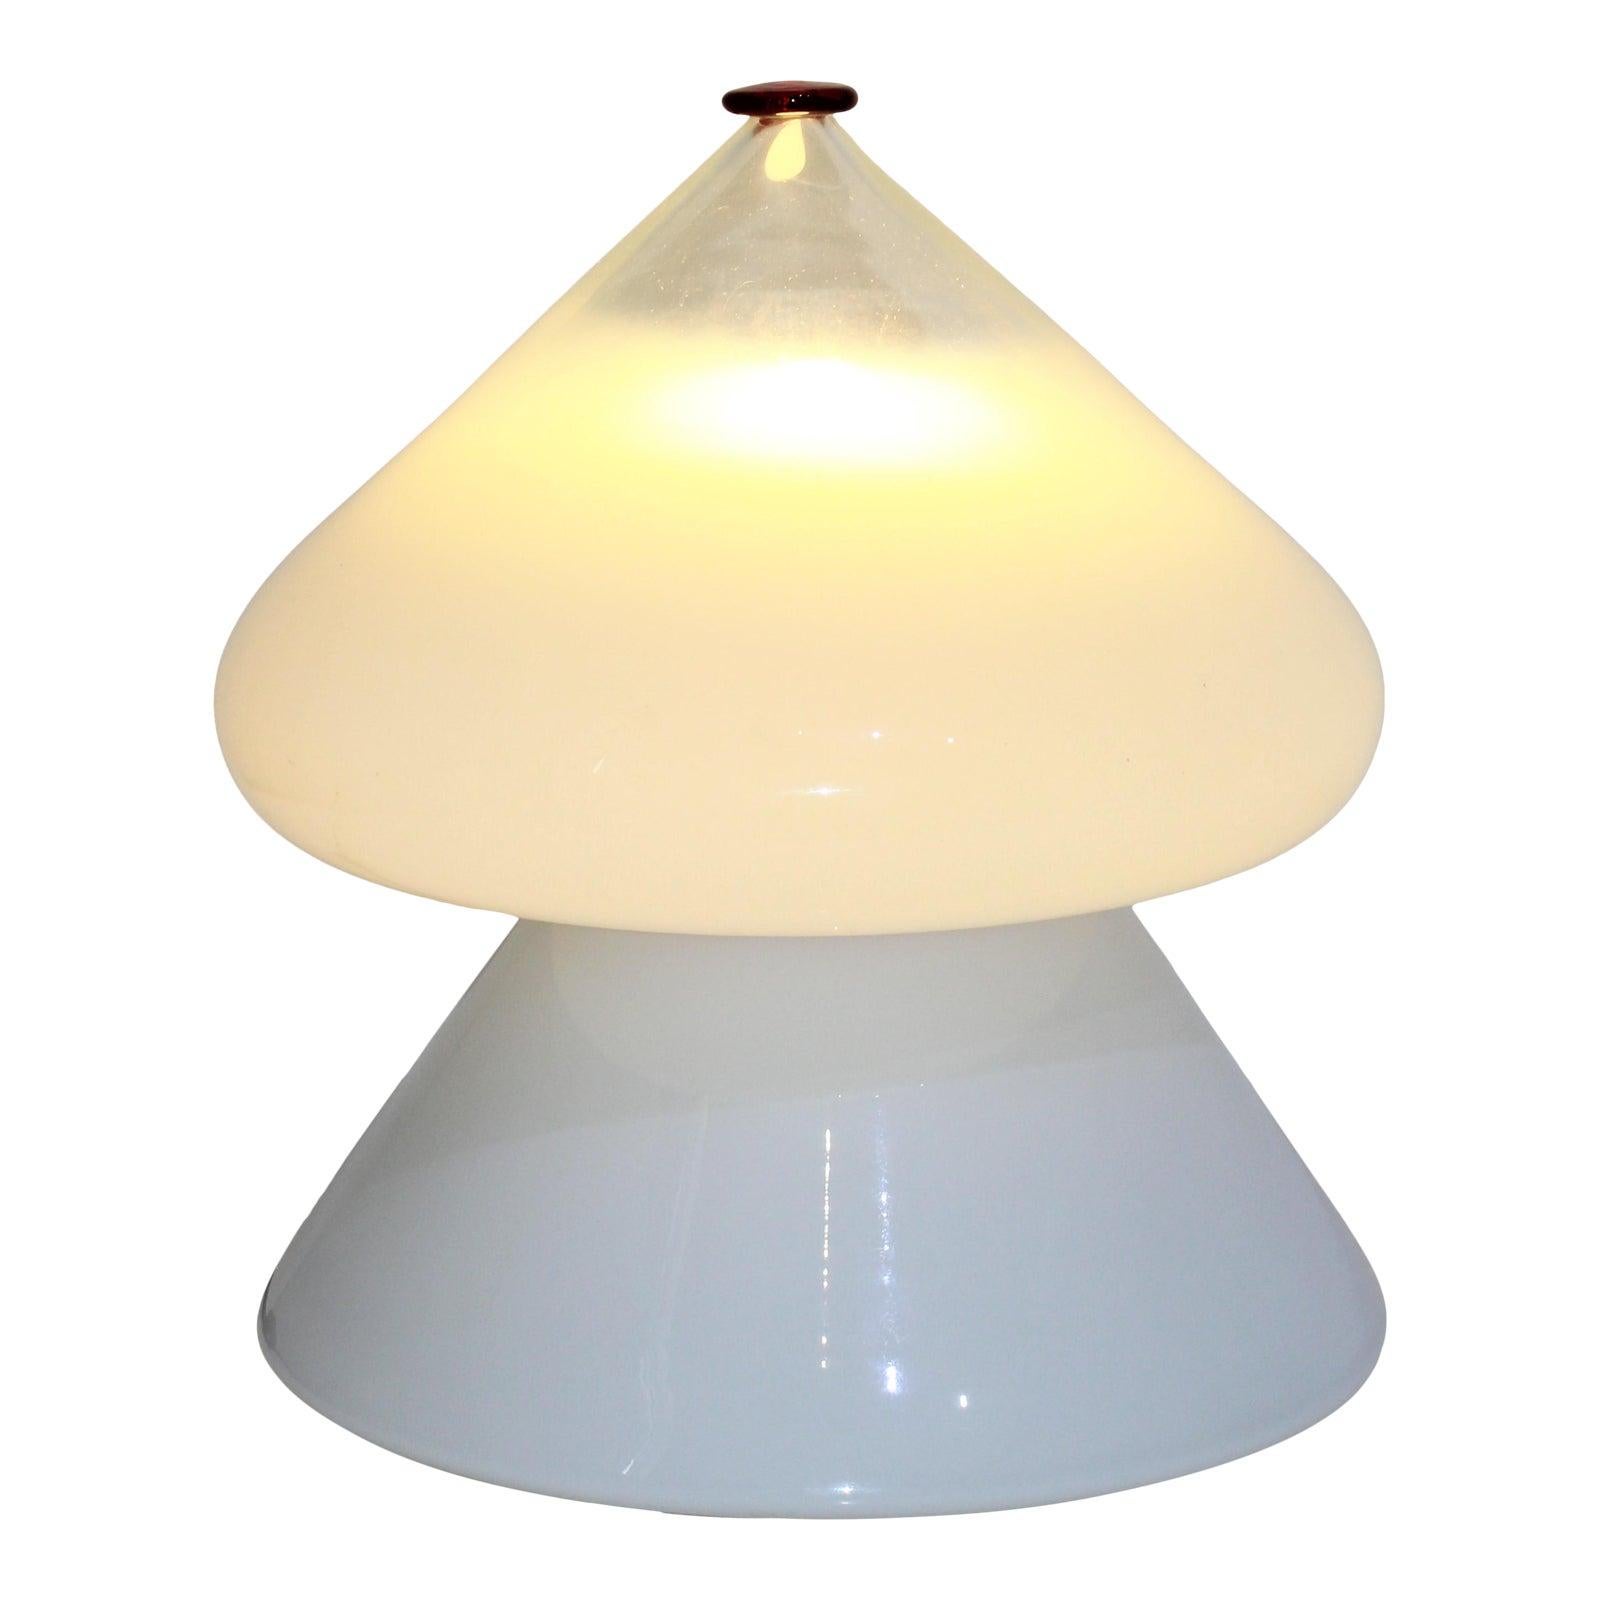 Mid-Century Modern Venini table lamp white, clear, red cap from a Palm Beach estate.

Designed as 2 pieces, and acid-etched signature on the upper piece.

There is a small blemish on the inside rim of the bottom piece - see photo.